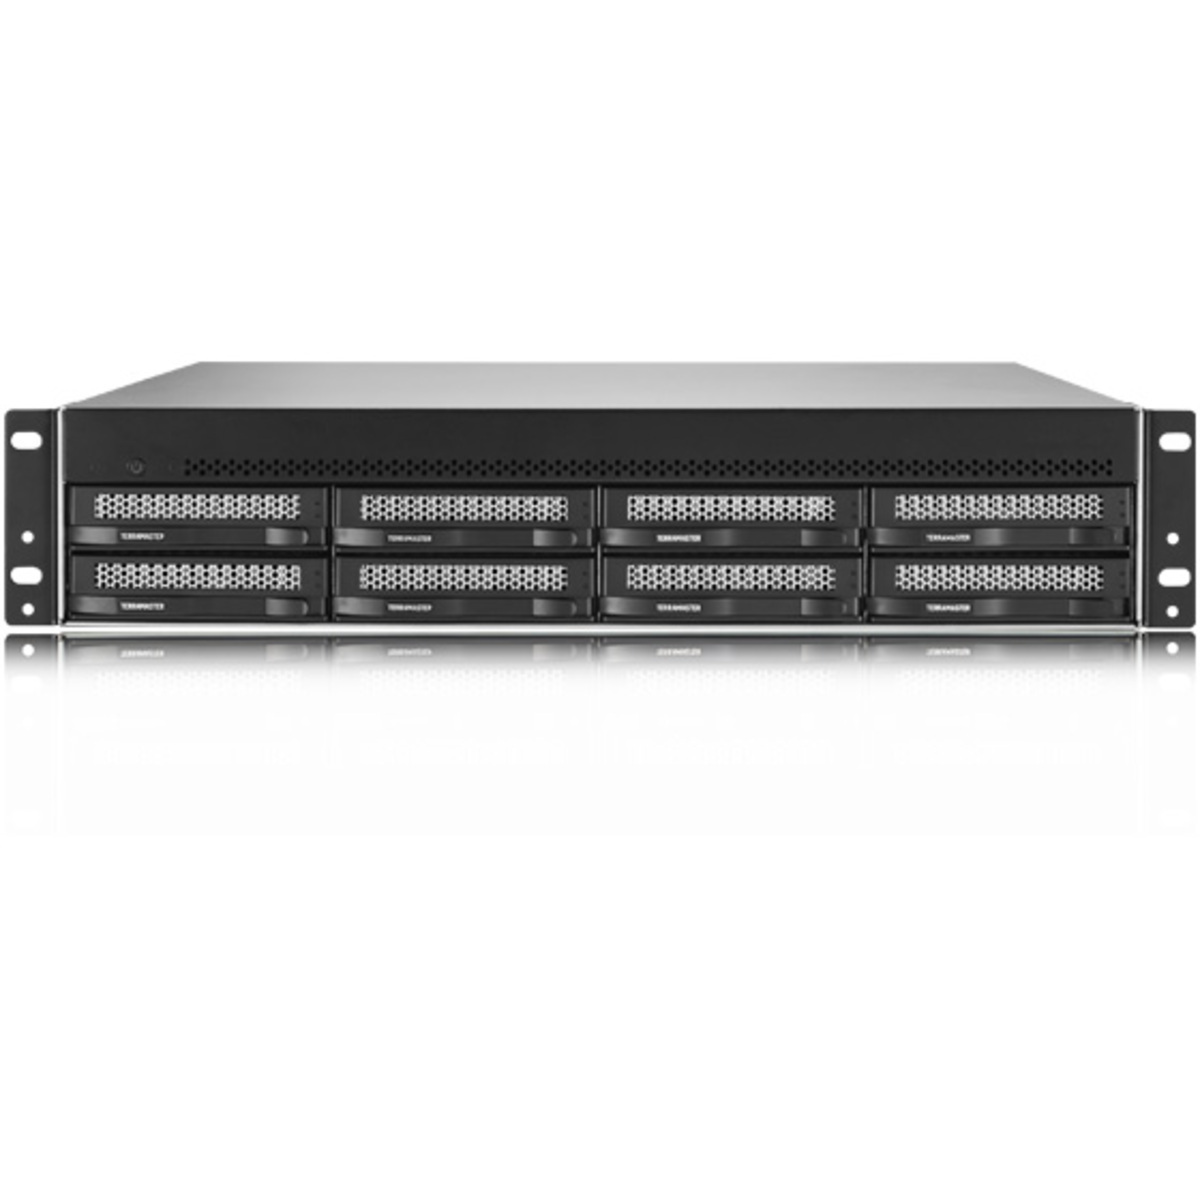 TerraMaster U8-450 8tb 8-Bay RackMount Multimedia / Power User / Business NAS - Network Attached Storage Device 8x1tb Crucial MX500 CT1000MX500SSD1 2.5 560/510MB/s SATA 6Gb/s SSD CONSUMER Class Drives Installed - Burn-In Tested U8-450